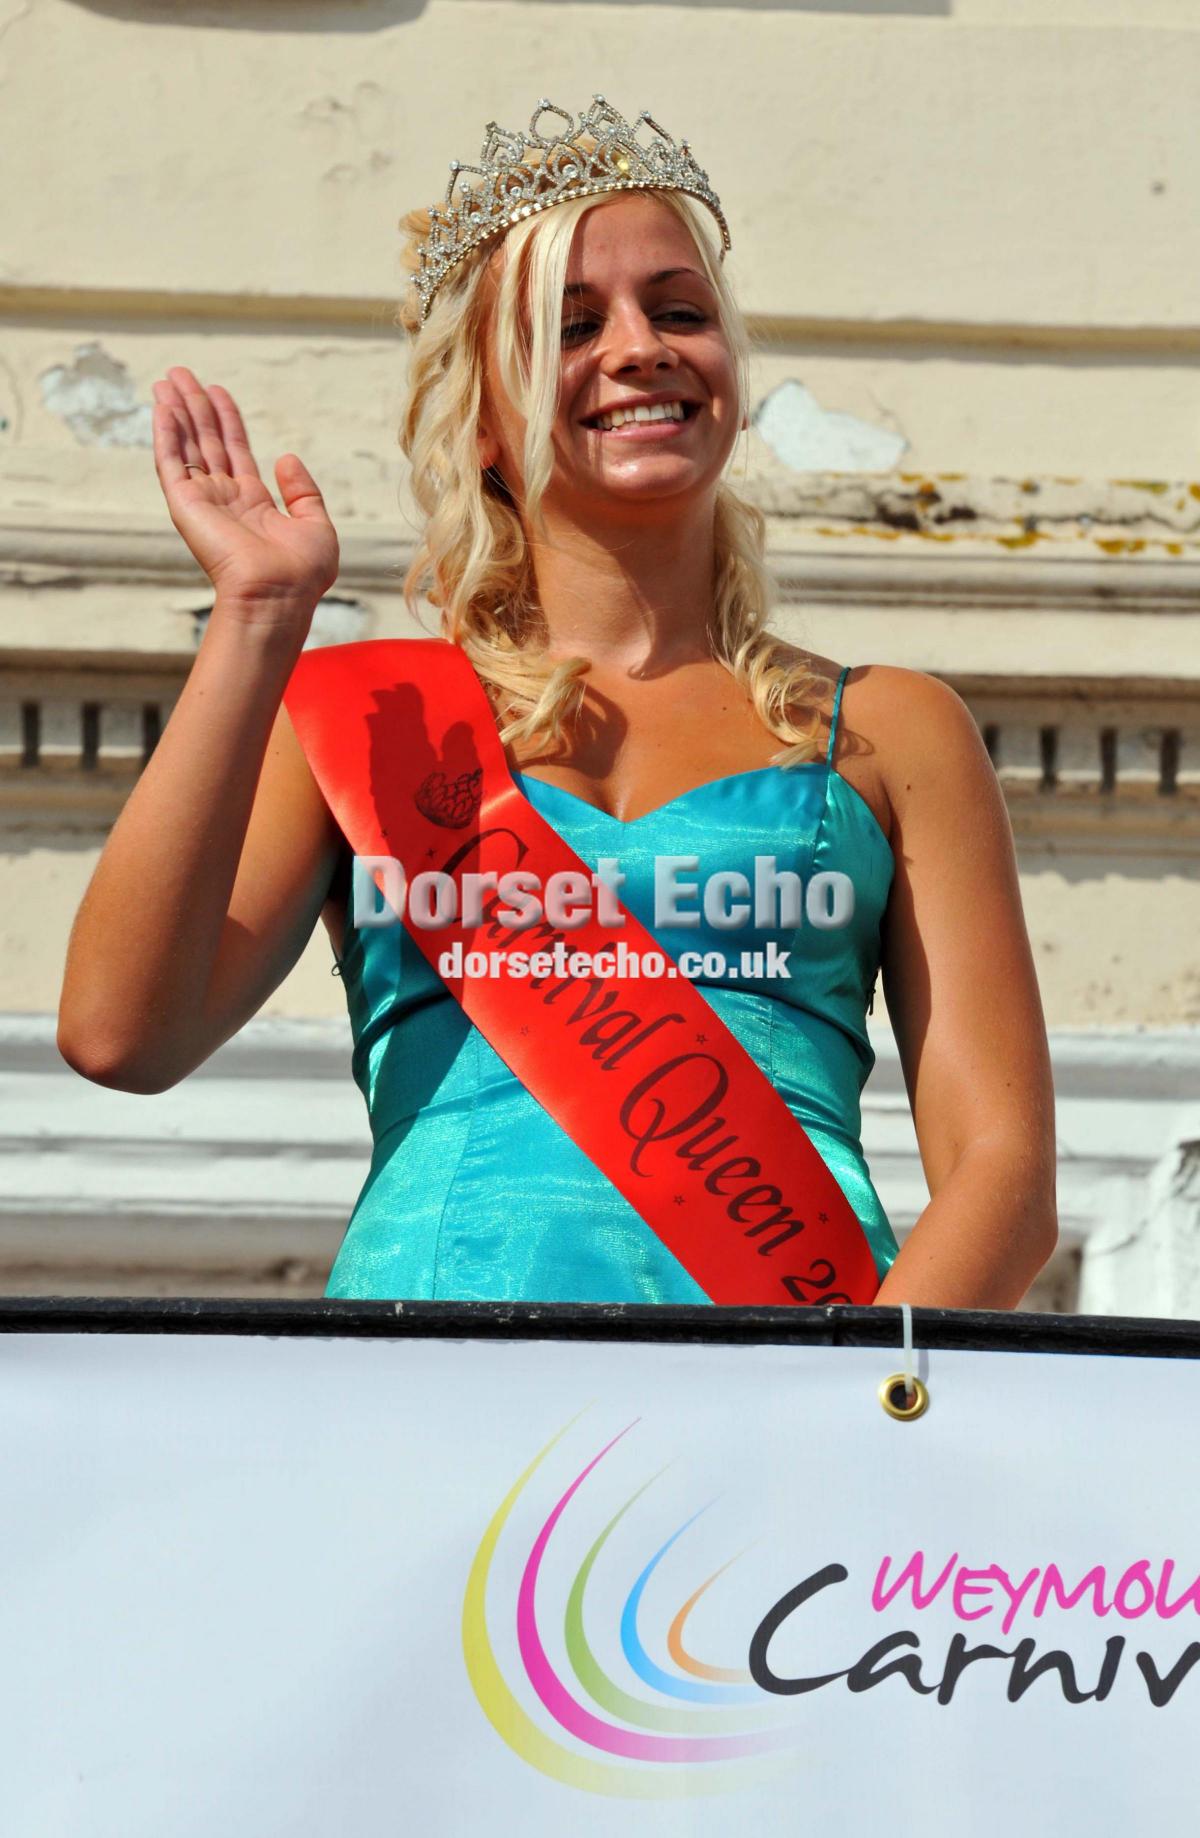 Carnival Queen Gina Hartleywaves to the crowds at her coronation